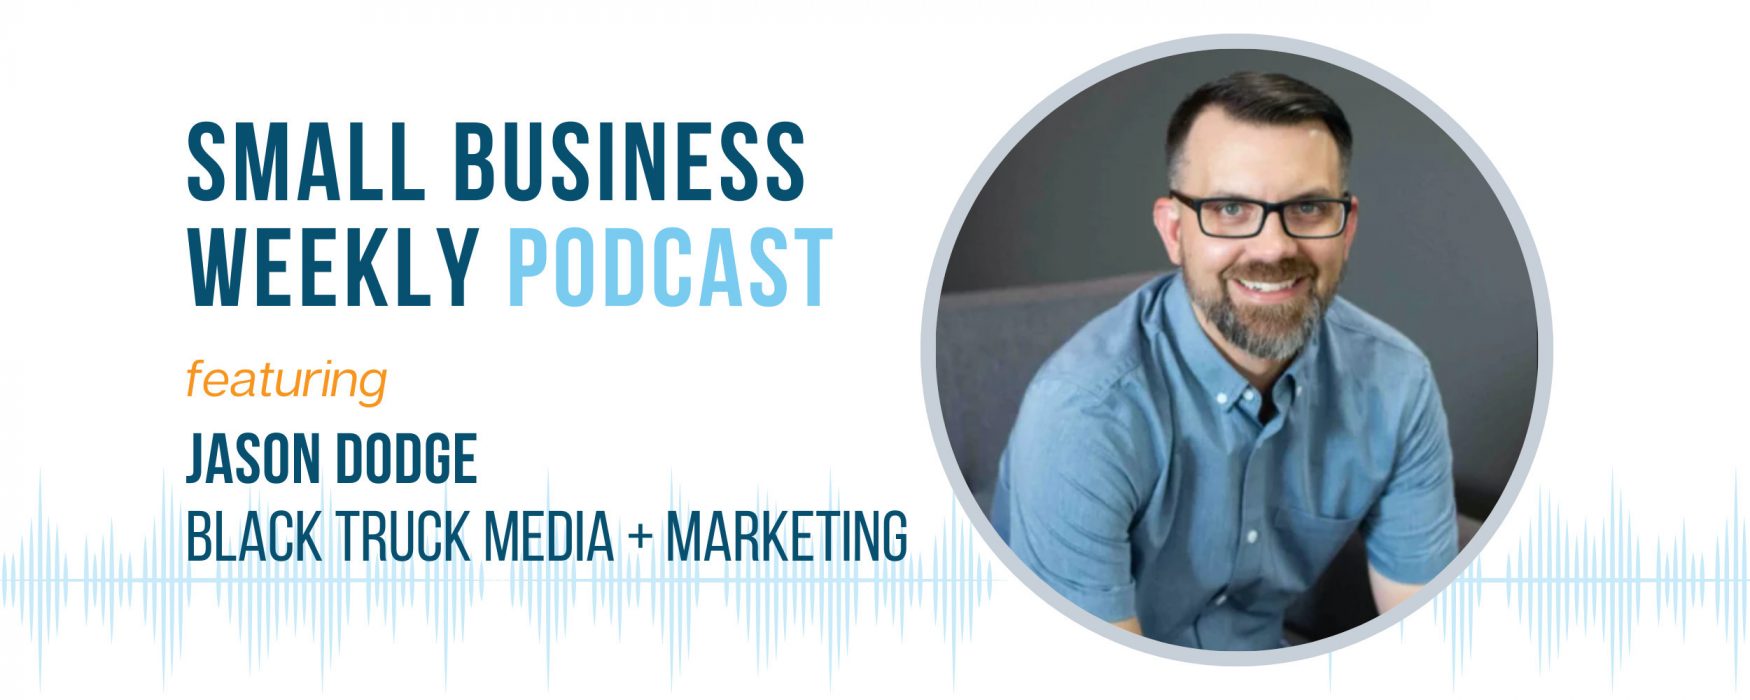 The Small Business Weekly podcast featuring Jason Dodge